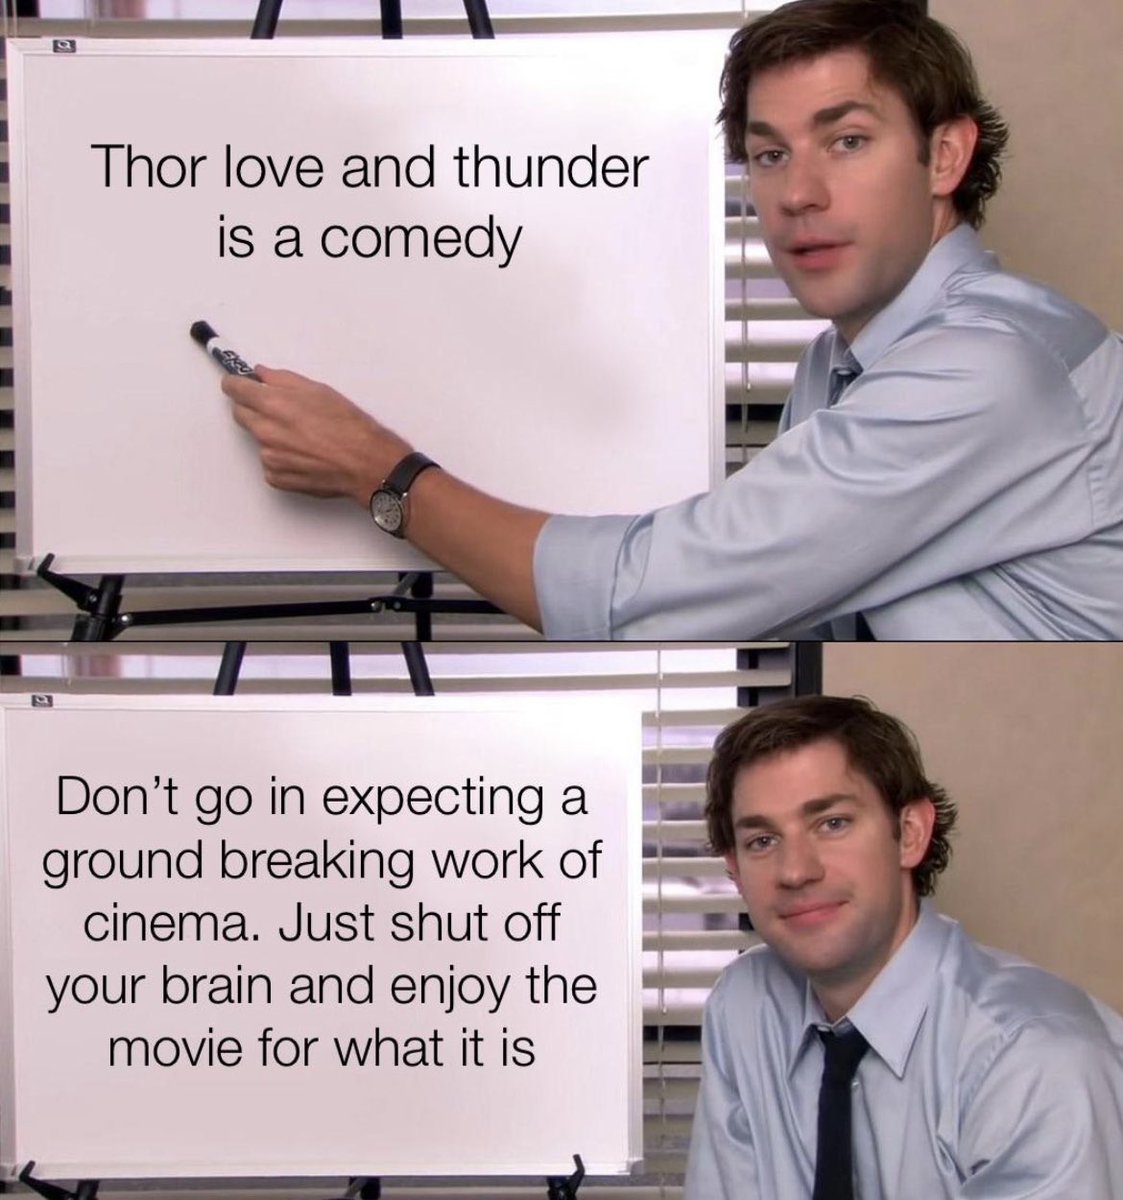 RT @Surajsekh12: Quick review of Thor love and Thunder
#ThorLoveAndThunder 
#Thor 
#Gorr https://t.co/QXcX3oM55a